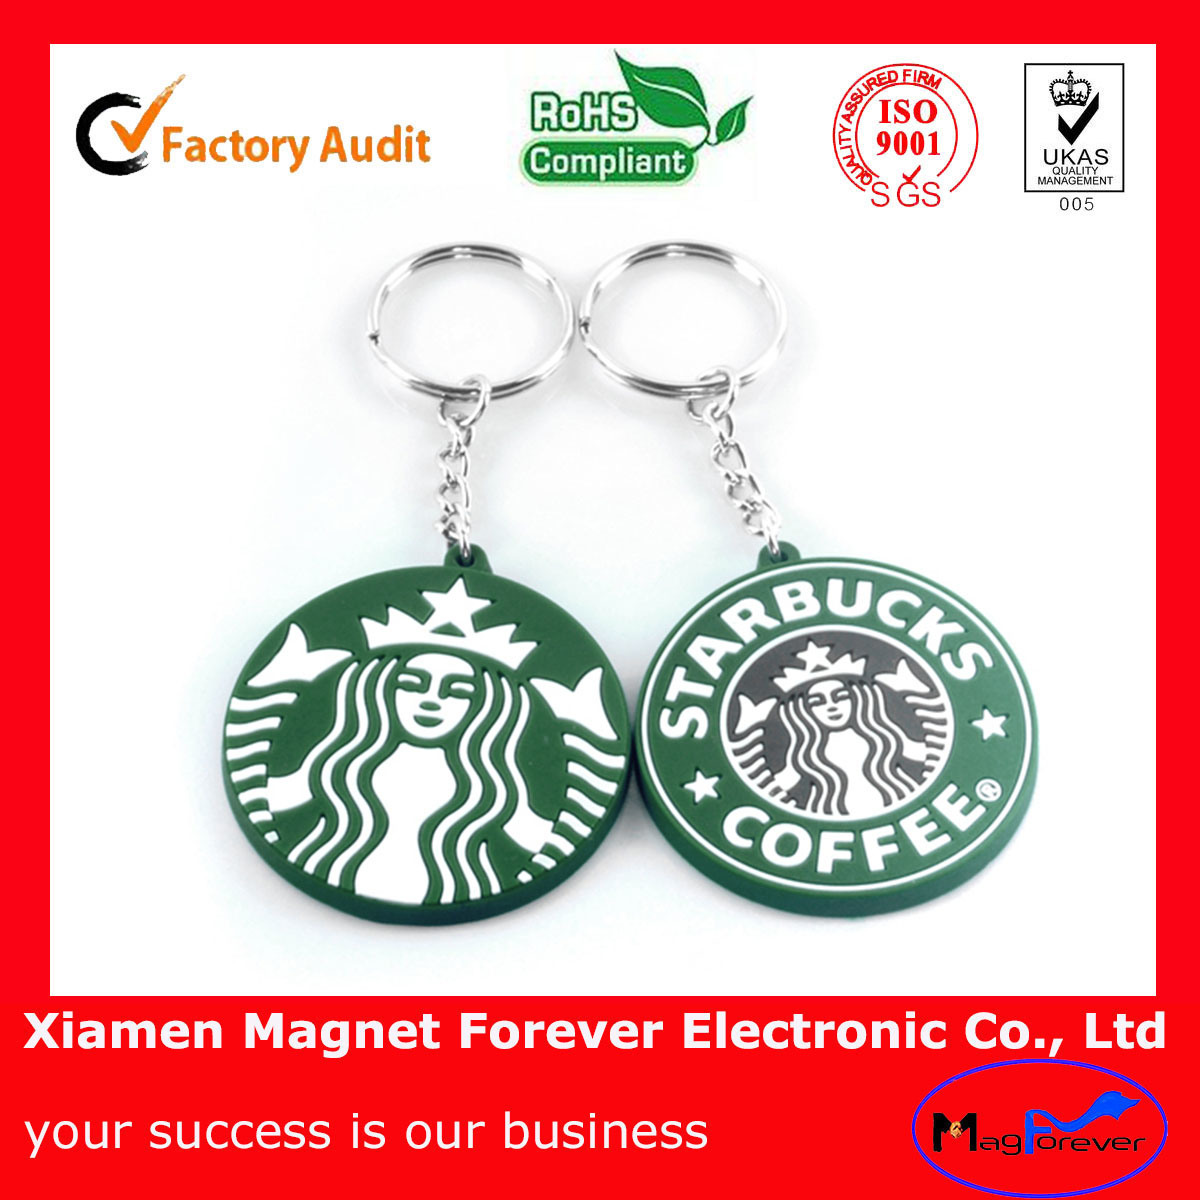 Customized Rubber Key Chain as Souvenir with Your Logo